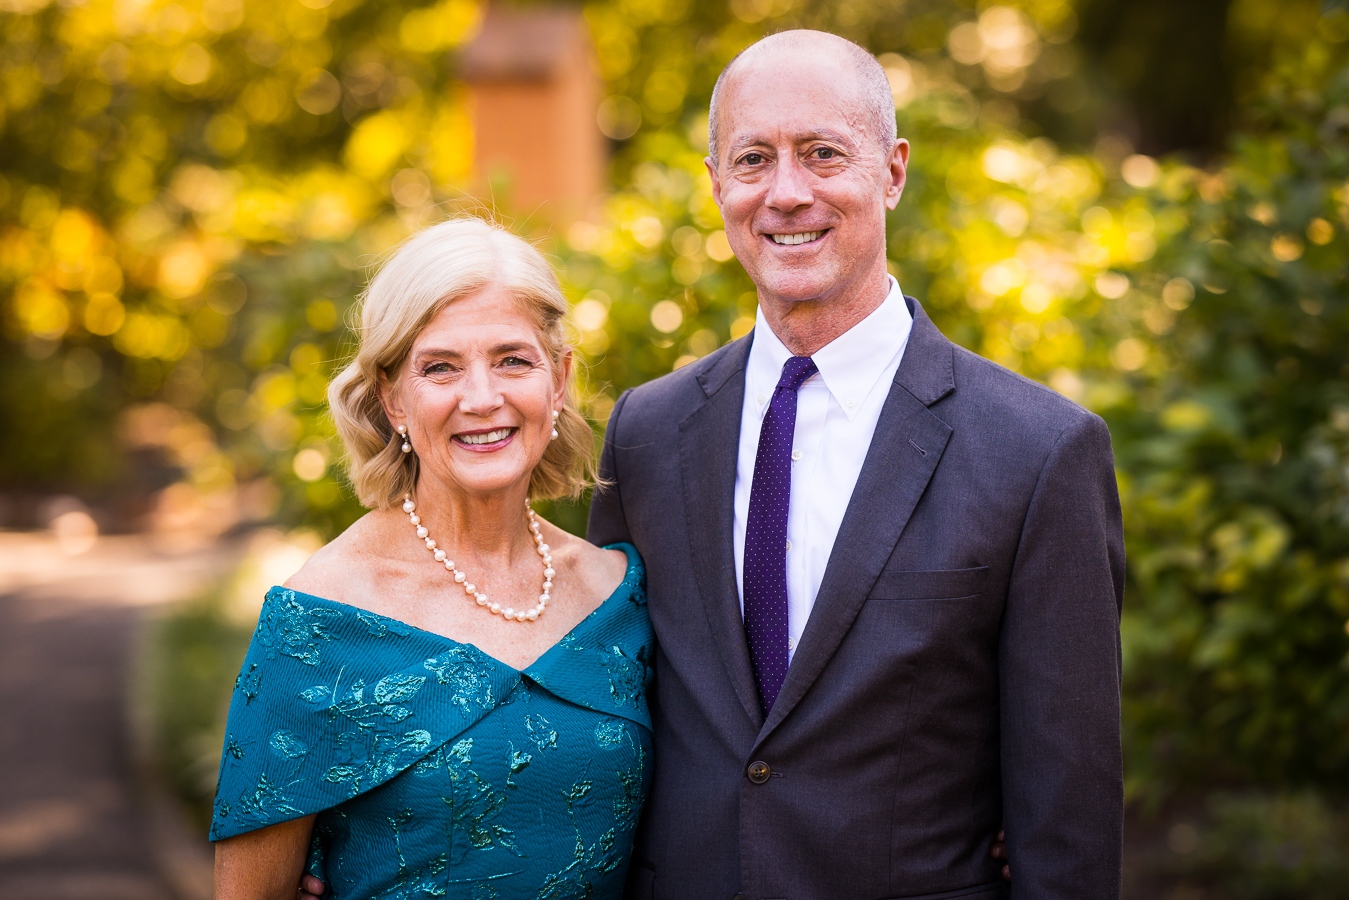 portrait photographer, Lisa rhinehart, captures this traditional portrait of the grooms parents after this multicultural wedding ceremony at st francis hall in dc 